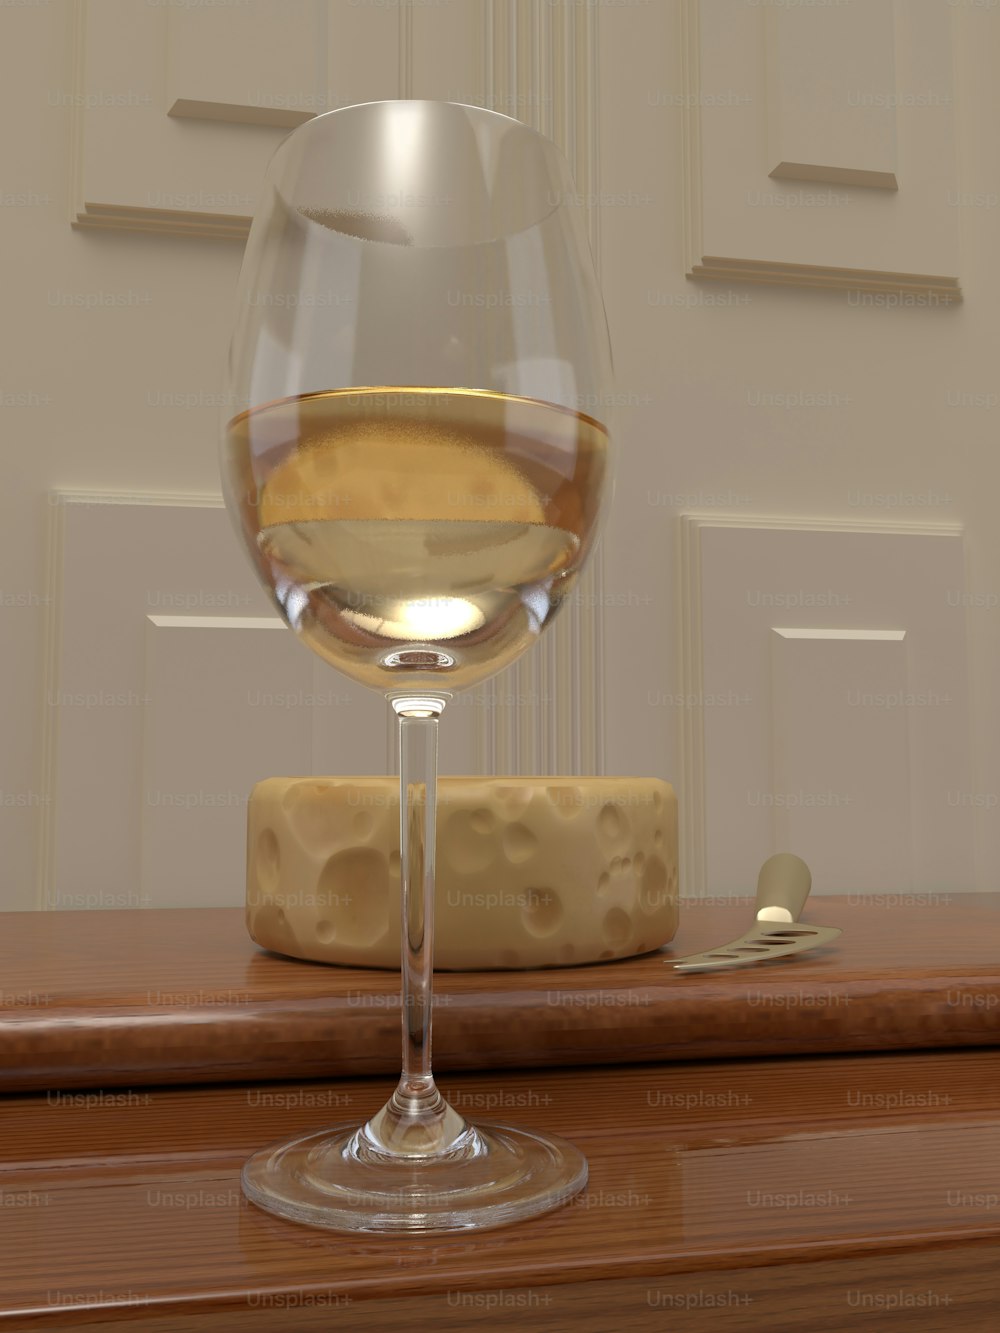 a glass of wine sitting on top of a wooden table